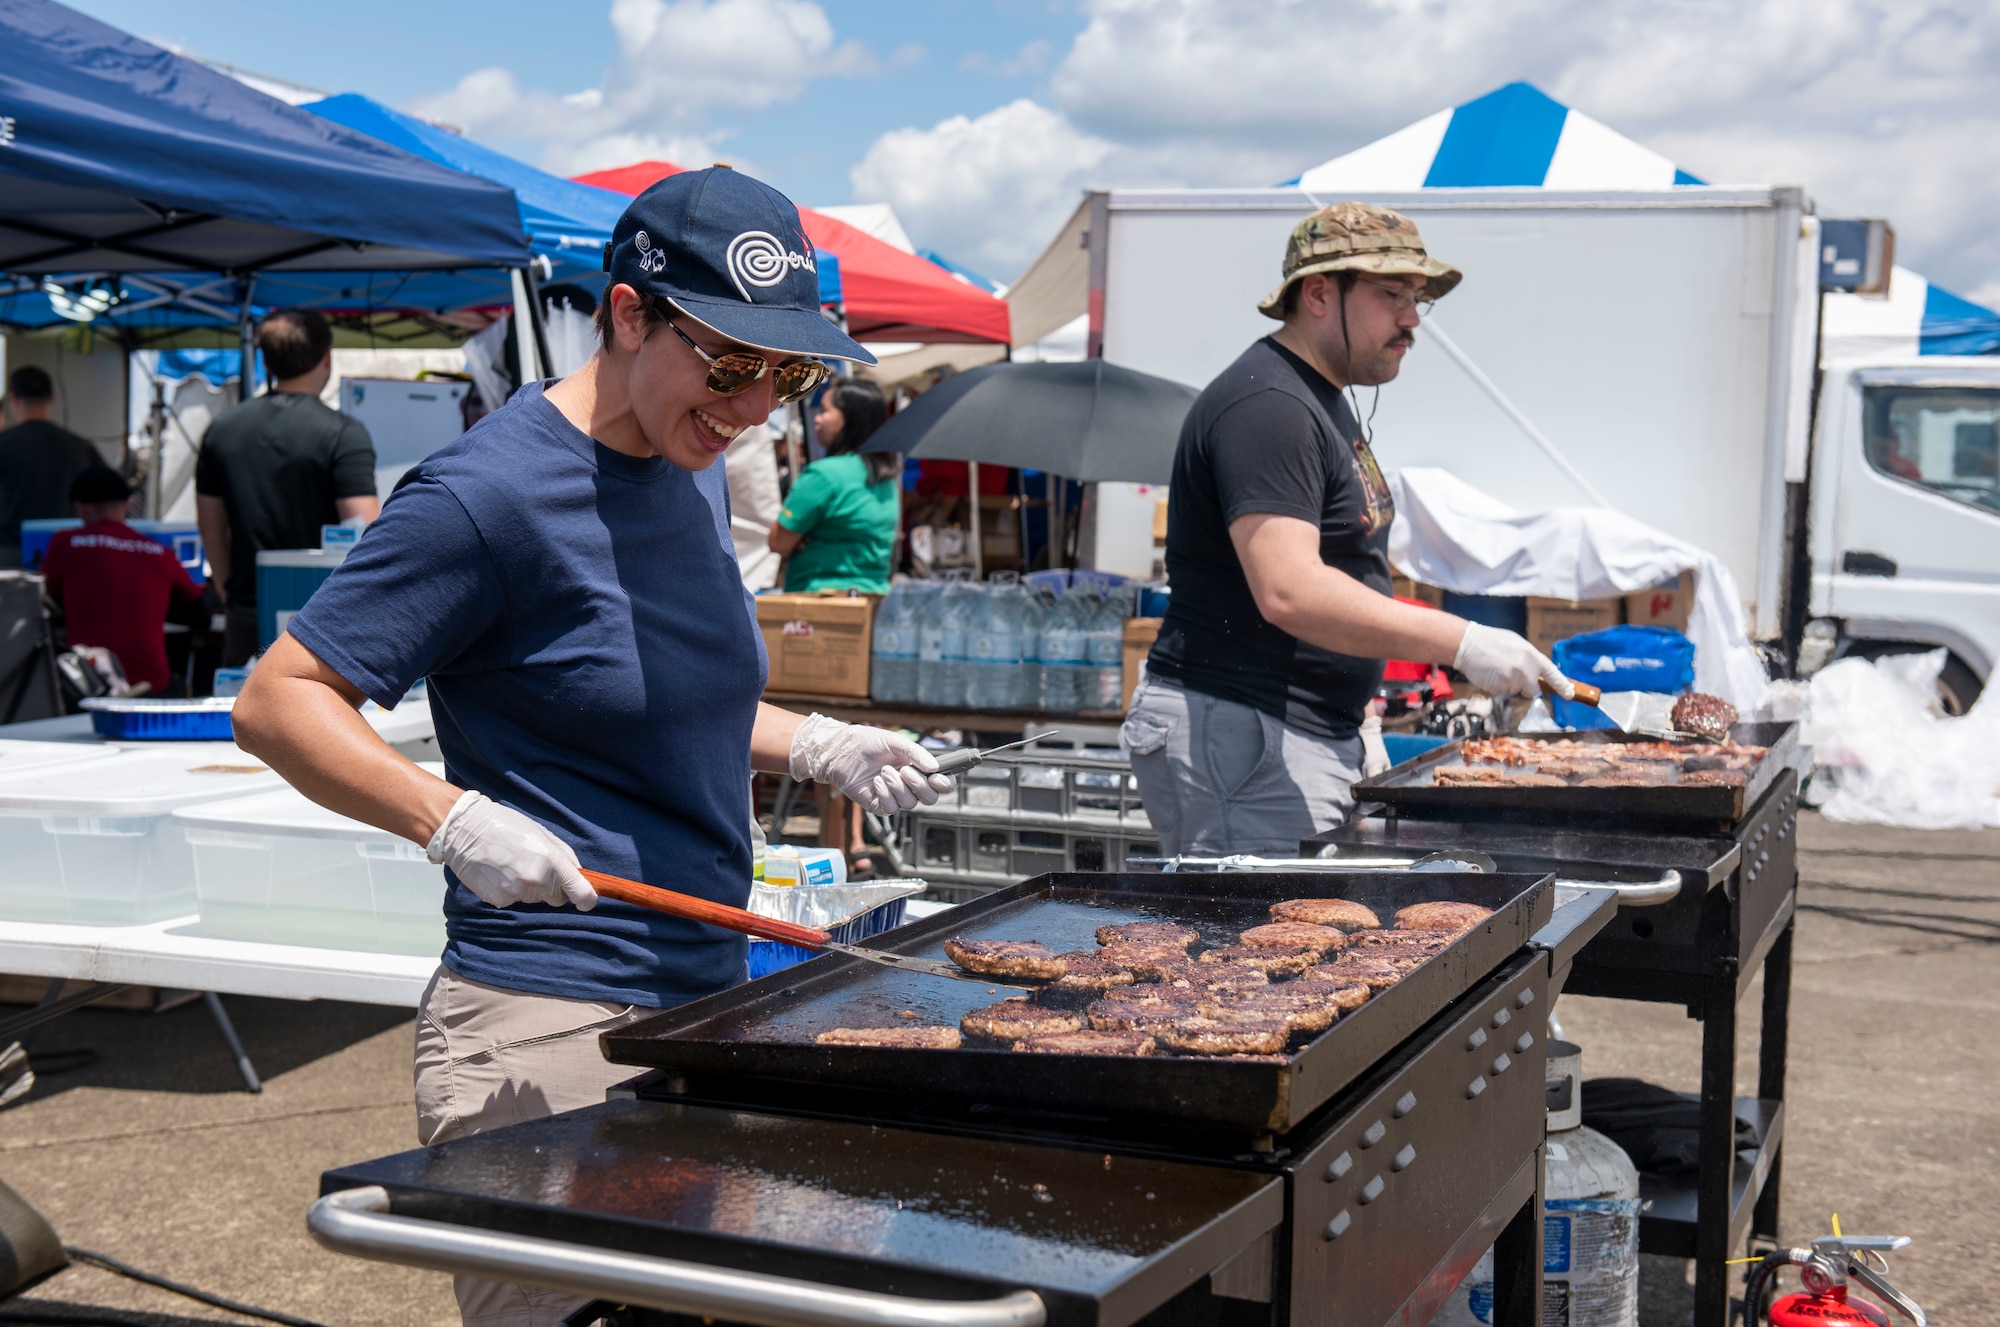 Volunteers flip burgers on a grill during Friendship Festival 2022, at Yokota Air Base, Japan May 22, 2022. The two-day festival was an opportunity for visitors to learn more about the U.S. and Japan bilateral partnership, while strengthening the bonds between Yokota and the local communities. Yokota was able to host the event with the support of Japanese Self-Defense Force, sister services and the local community. (U.S. Air Force photo by Senior Airman Hannah Bean)